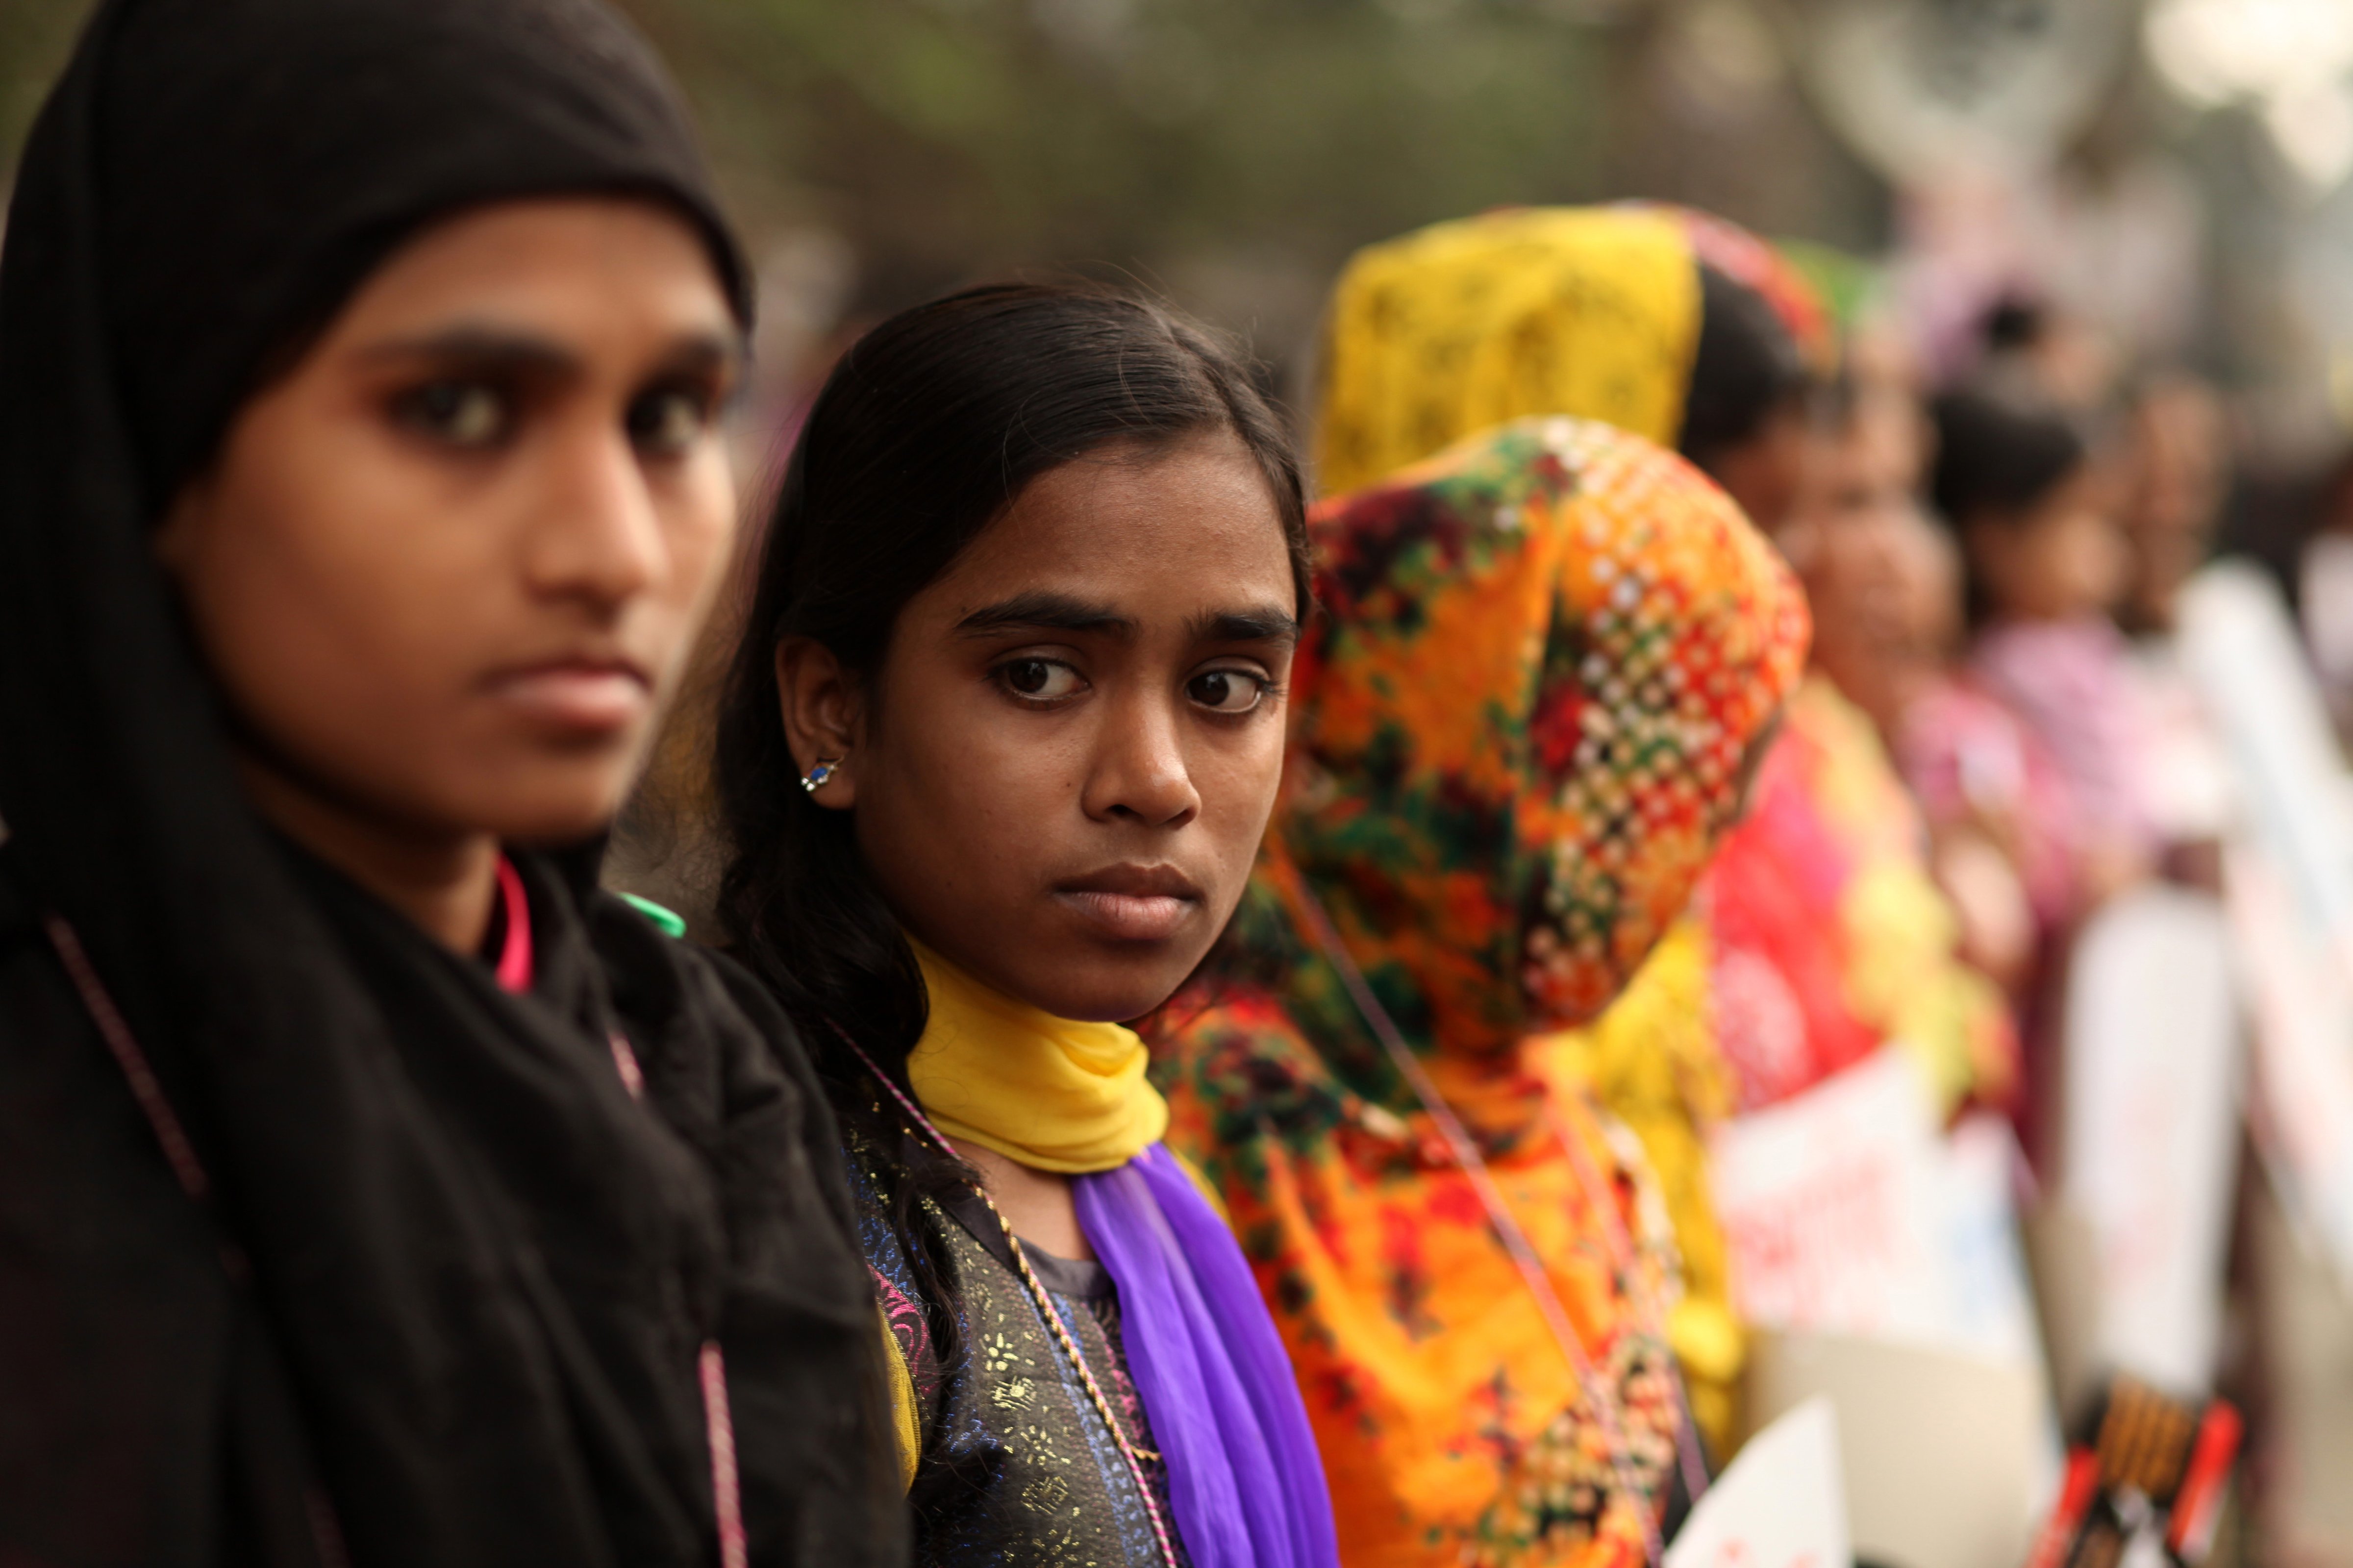 Woman organizations protest against child marriage in front of Press Club in Dhaka, Bangladesh, on Dec. 3, 2014. (Pacific Press—LightRocket via Getty Images)